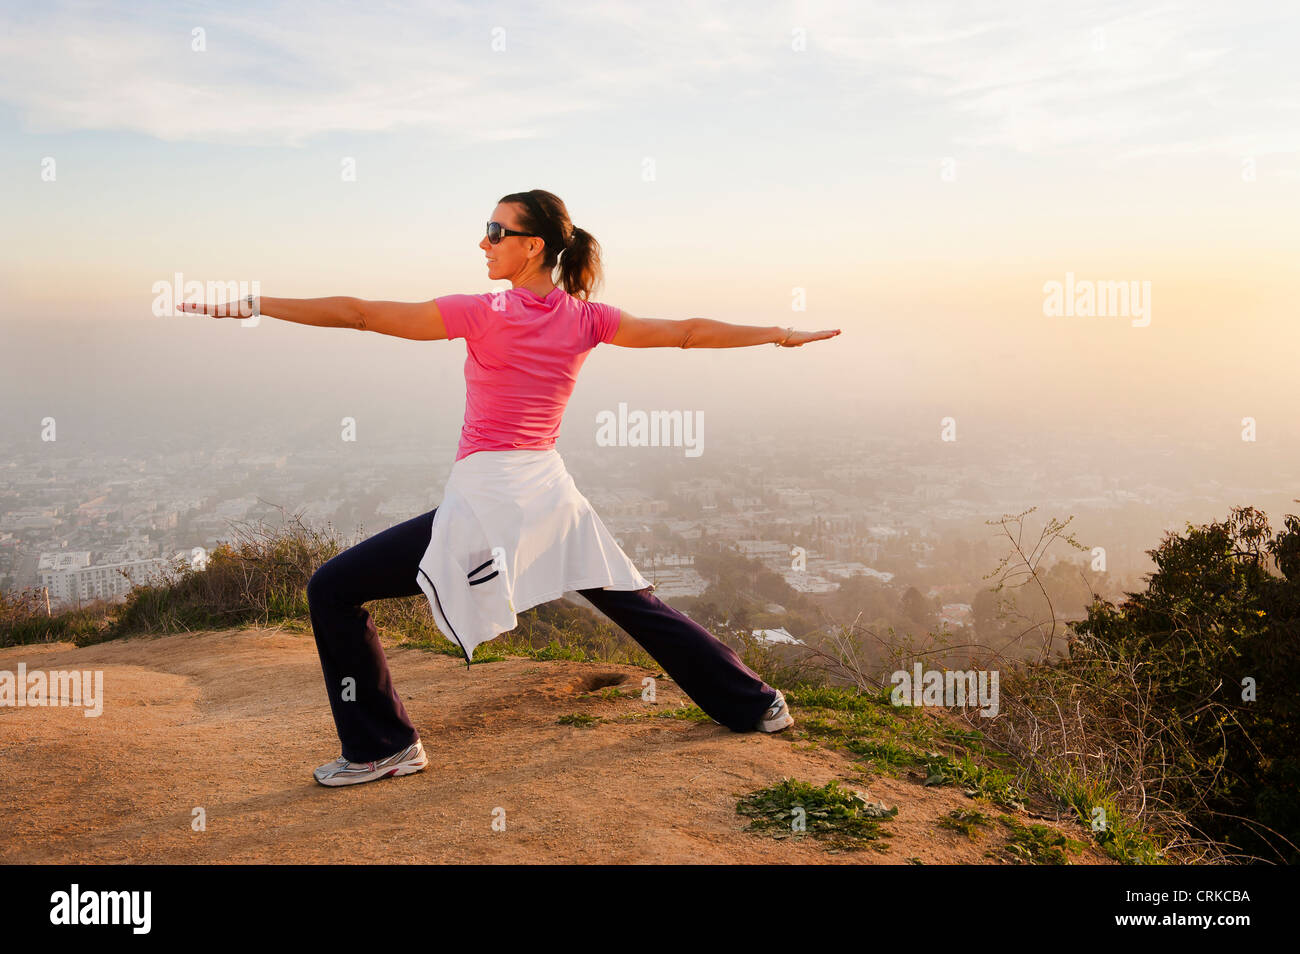 Woman stretching on hilltop Stock Photo